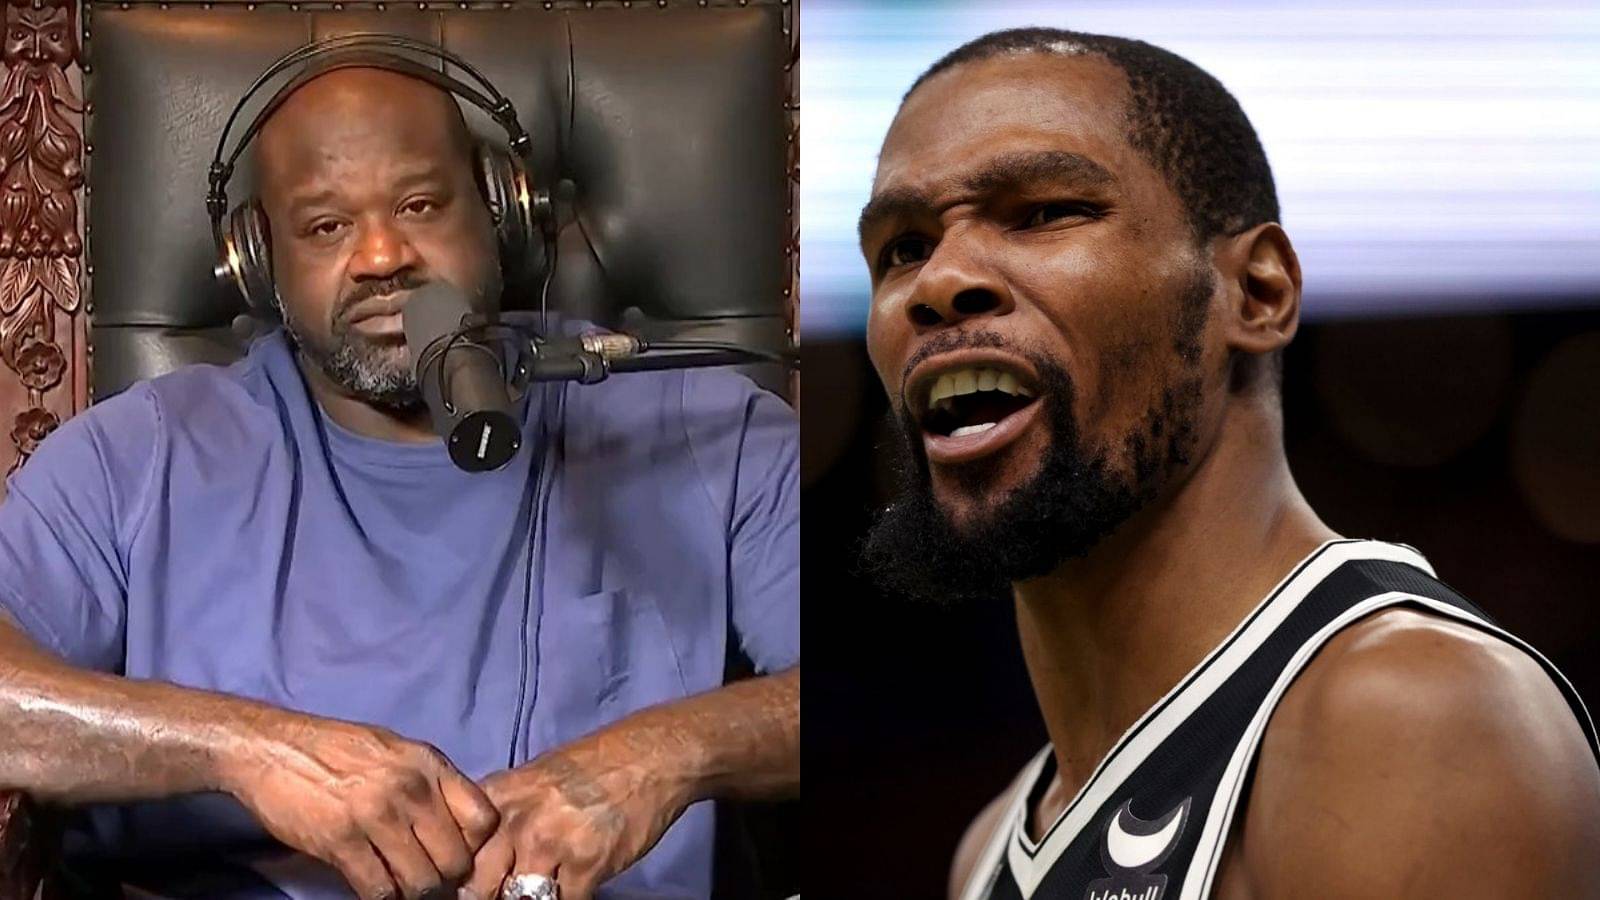 “Shaquille O’Neal, you are a billionaire bro”: Kevin Durant brings up Shaq’s net worth in response to him accepting his jealousy of Rudy Gobert earning $250 million